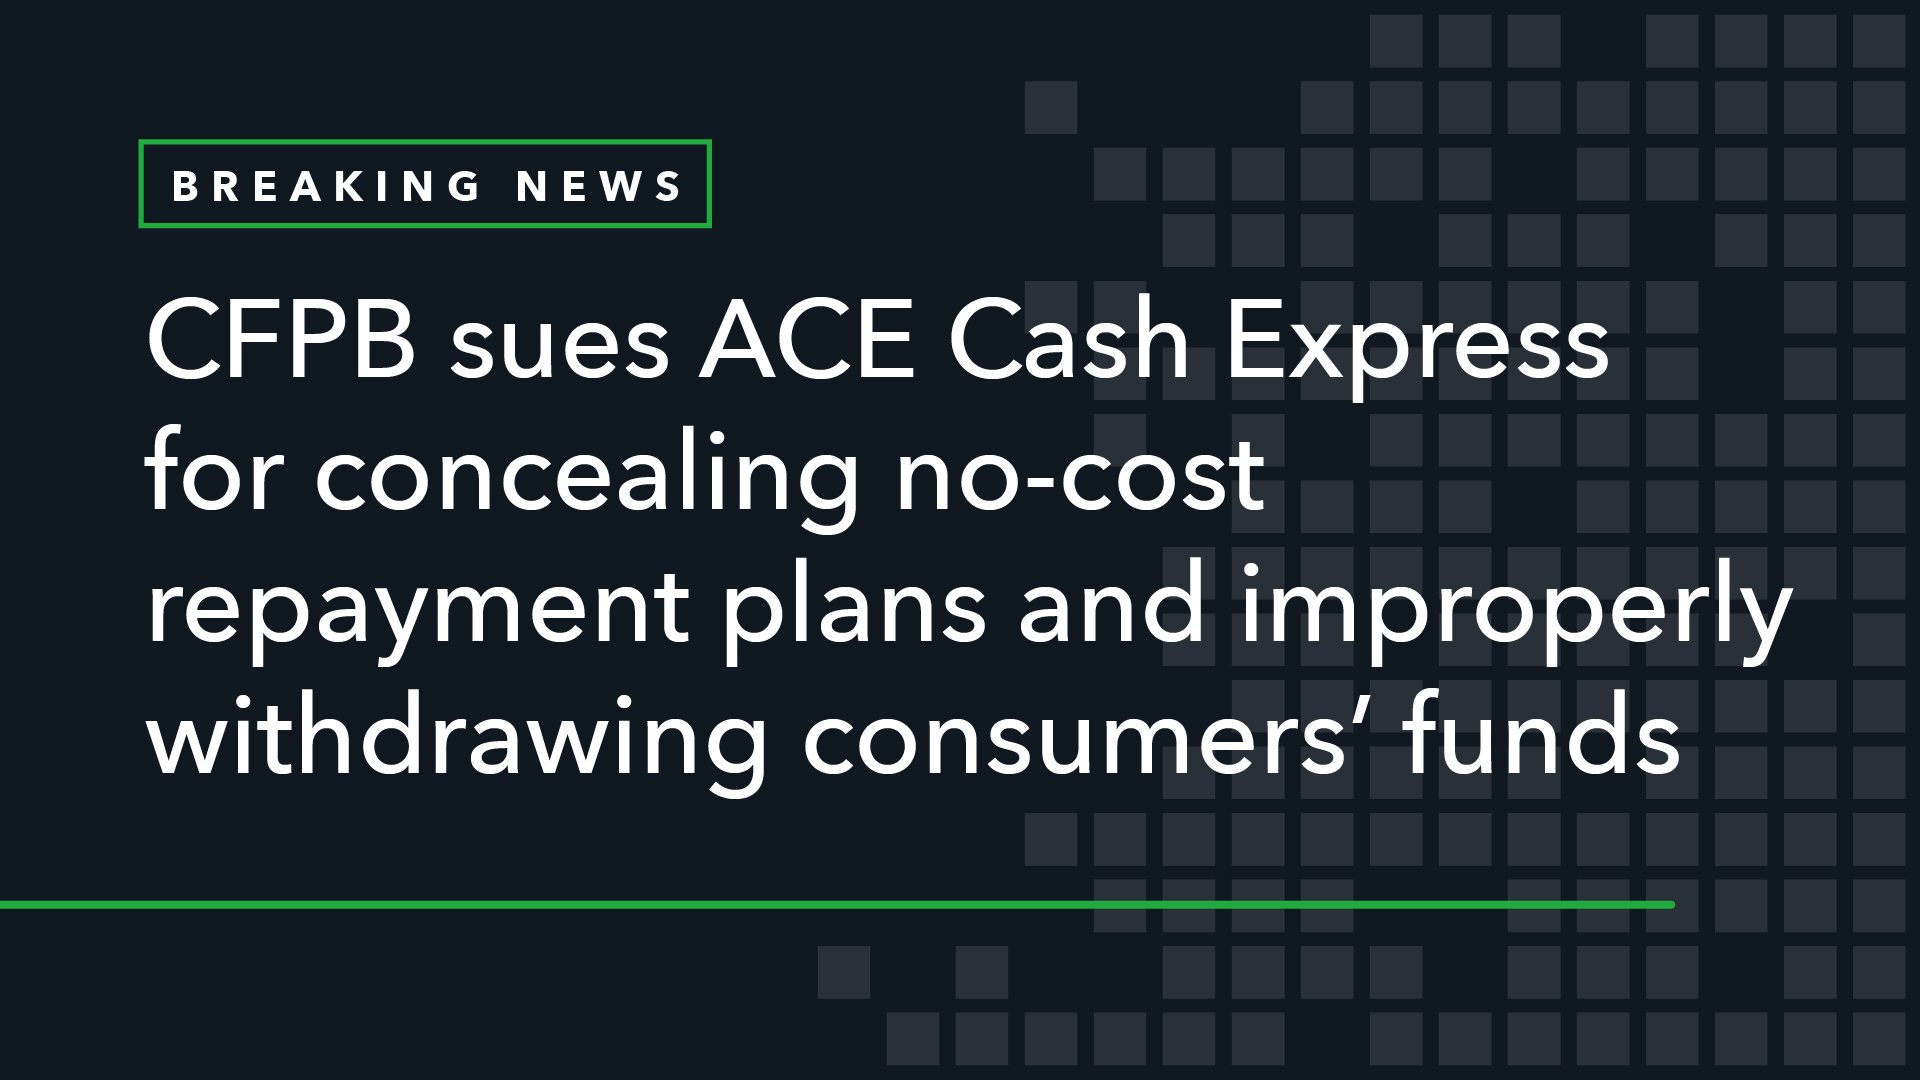 CFPB Sues ACE Cash Express for Concealing No-Cost Repayment Plans and Improperly Withdrawing Consumers’ Funds